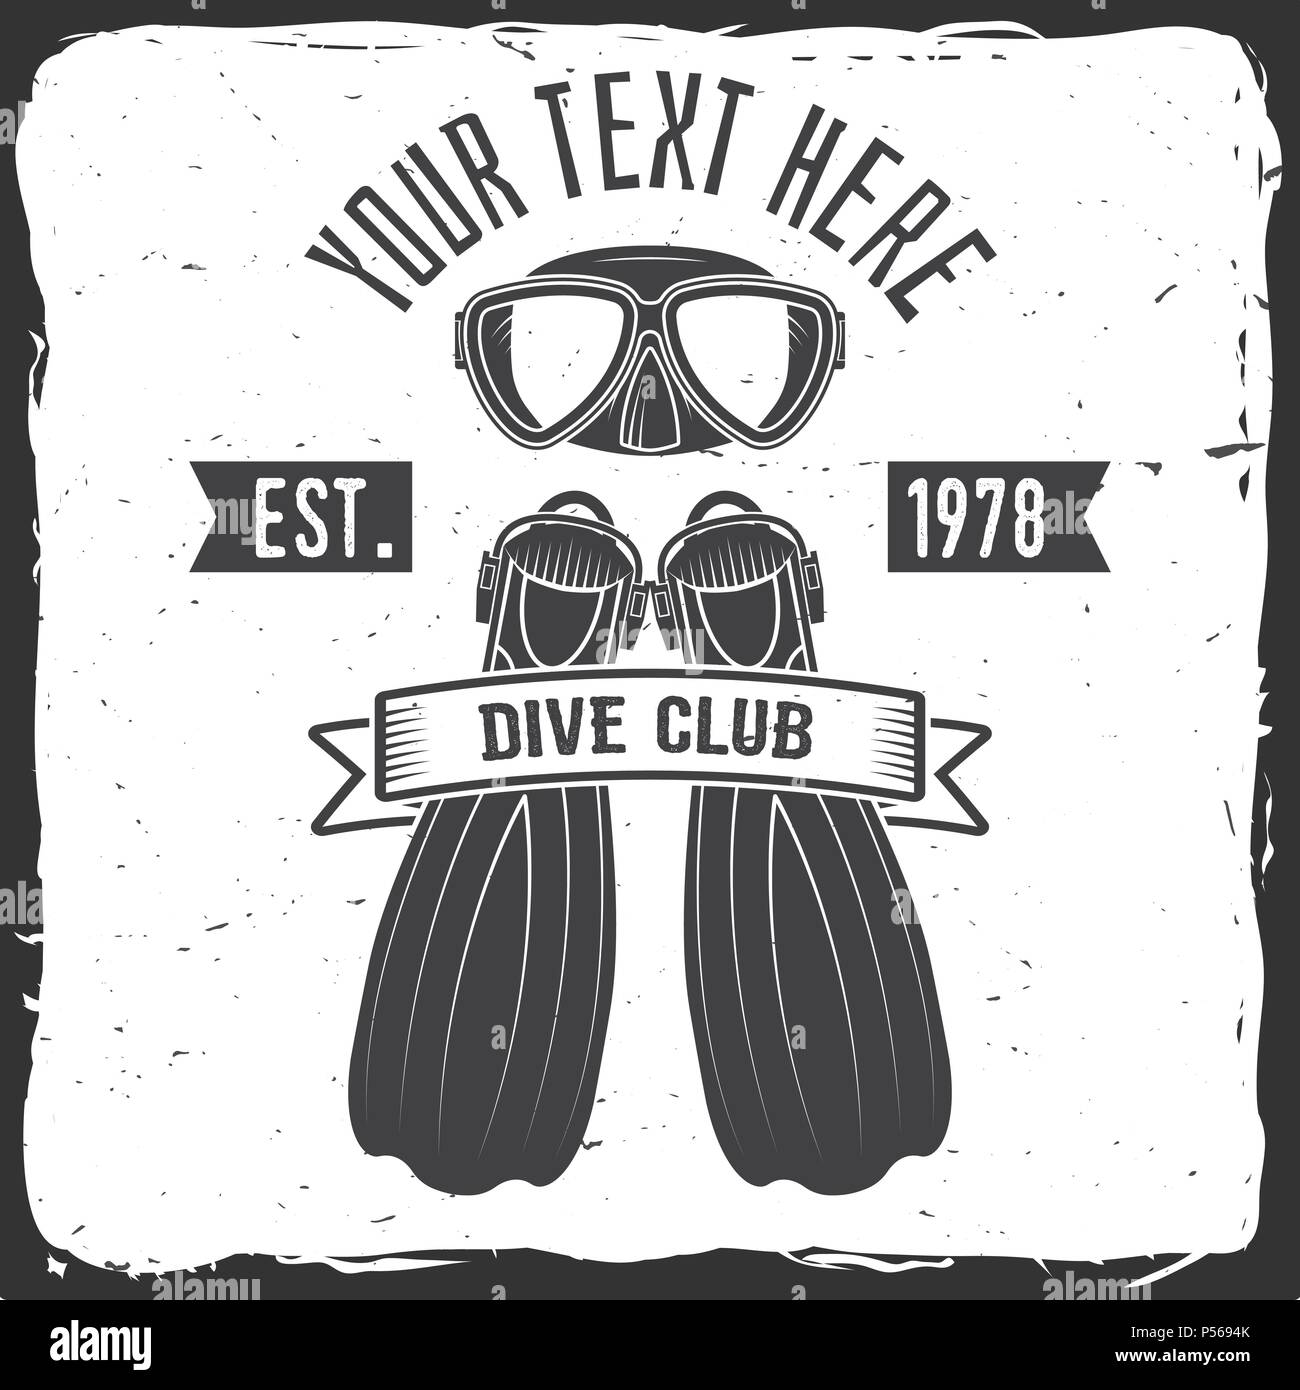 Scuba turtle dive club. Vector illustration. Concept for shirt or logo, print, stamp or tee. Vintage typography design with diving mask and fins silho Stock Vector